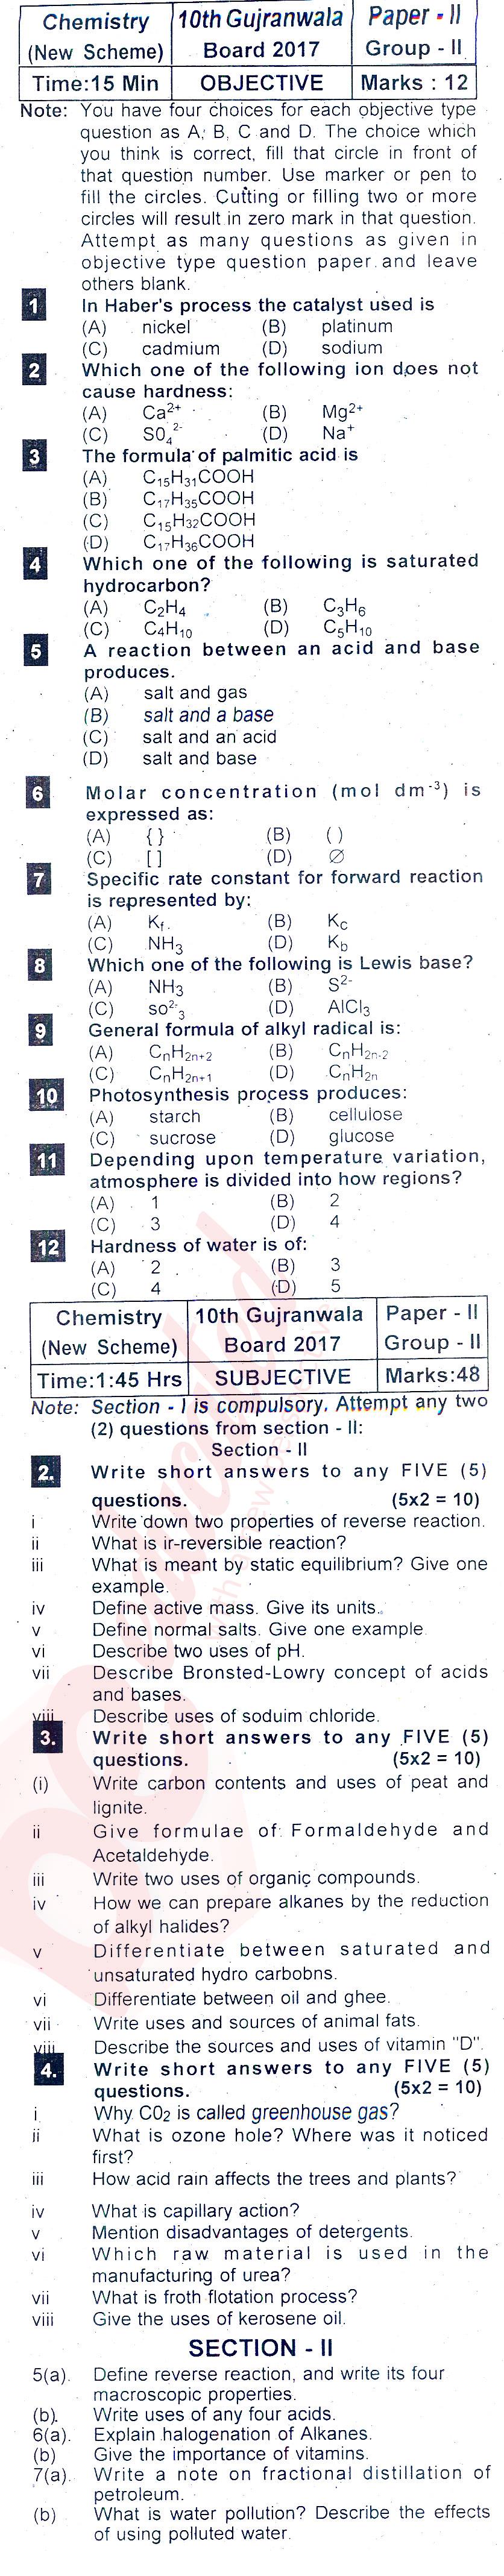 Chemistry 10th class Past Paper Group 2 BISE Gujranwala 2017